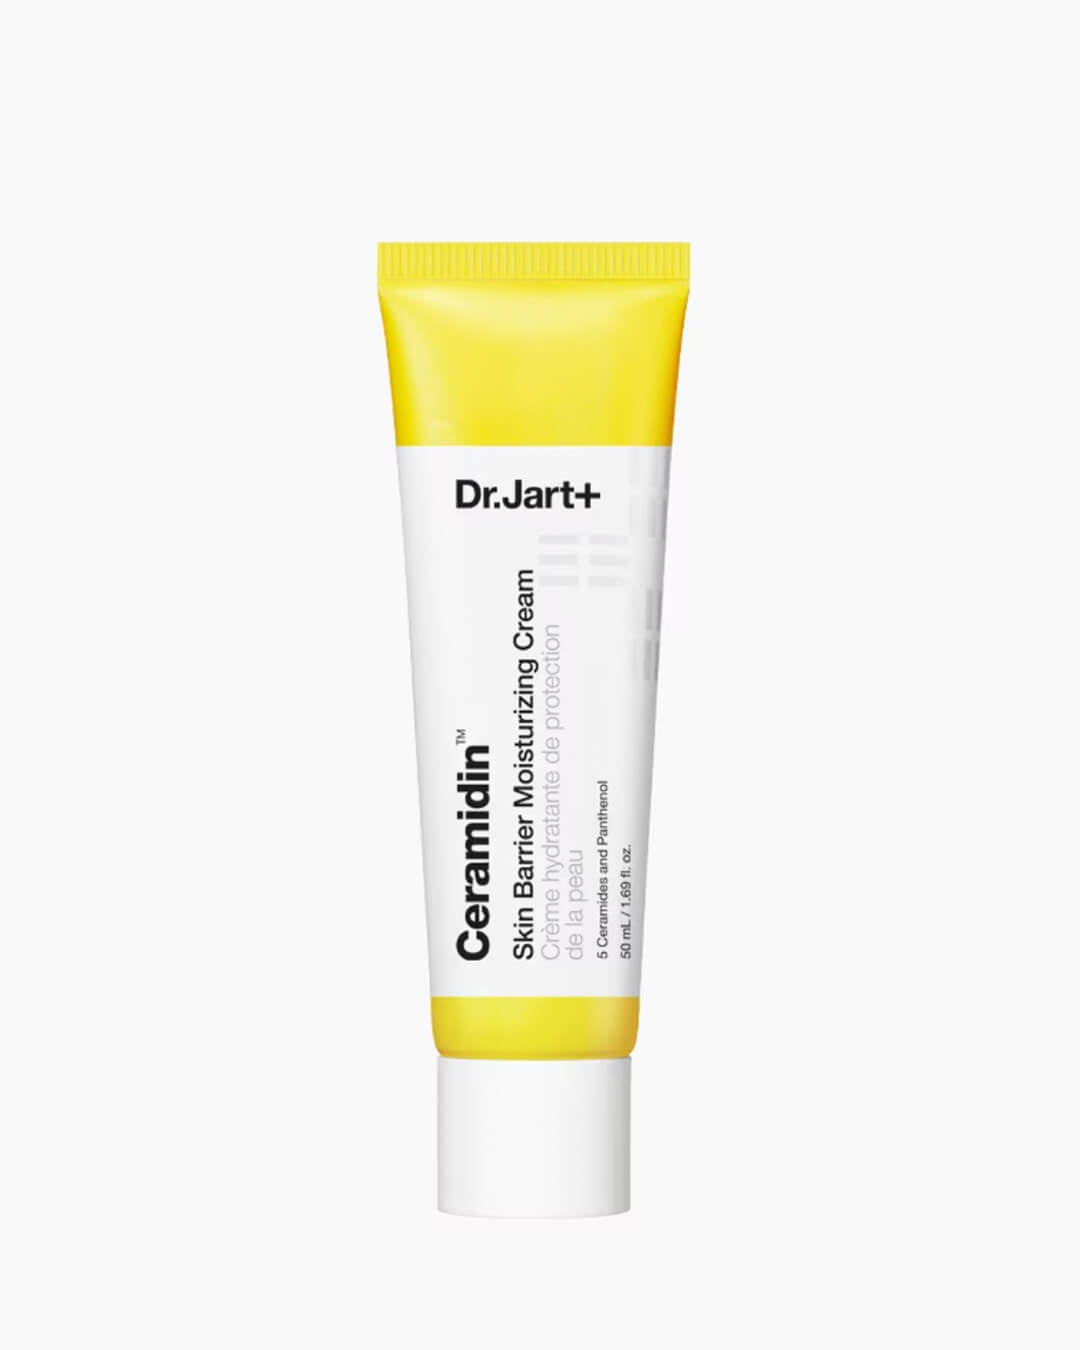 Reviewed: Dr. Jart+'s Ceramidin Cream Lives Up to the Hype